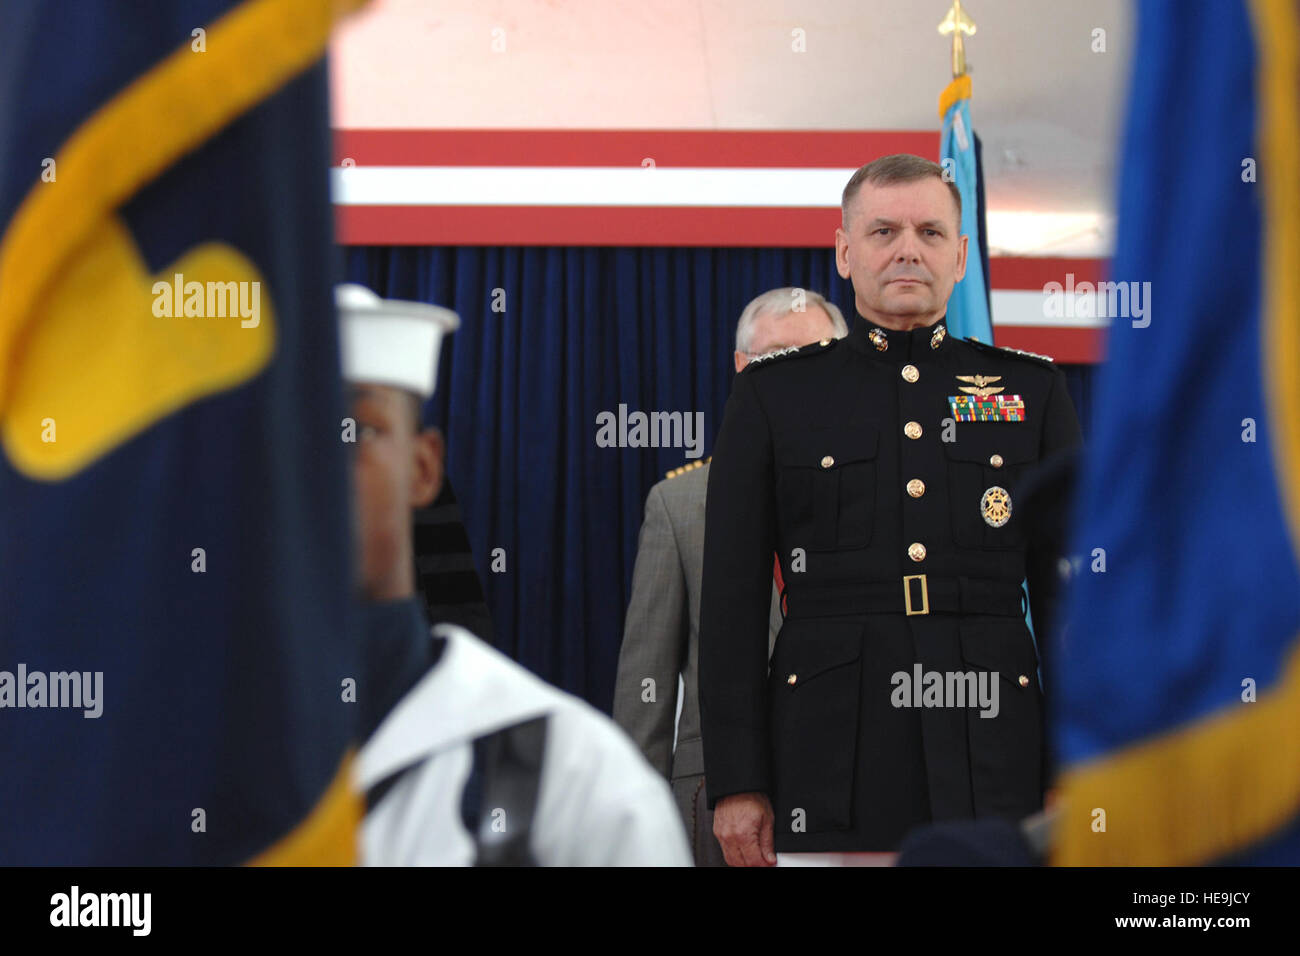 Marine Corps Gen. James E. Cartwright, vice chairman of the Joint Chiefs of Staff, stands at attention while the National Anthem plays at the National Defense University graduation at Fort Lesley J. McNair in Washington, D.C., June 12, 2008. Cartwright was the keynote speaker at the graduation.  Air Force Master Sgt. Adam M. Stump. (Released) Stock Photo